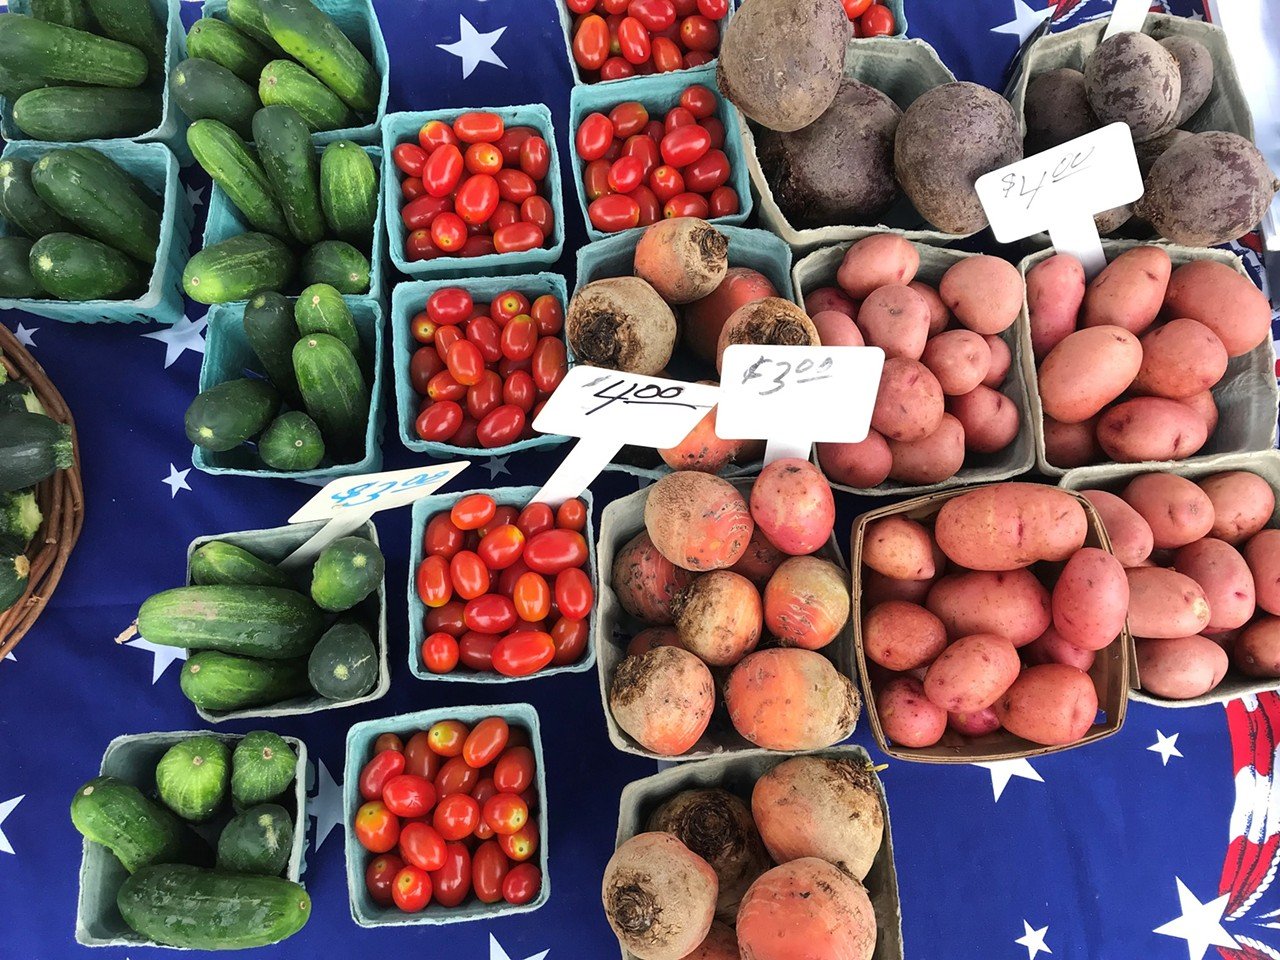  Independence Farmers Market  
2001 Jackwoods Pkwy., Independence
Saturday 8:30 a.m.-1 p.m. through October
This market offers many different locally-sourced items like honey, greens, organic cheese, pork chops, jams and jellies. Grass-fed beef is also available upon request.